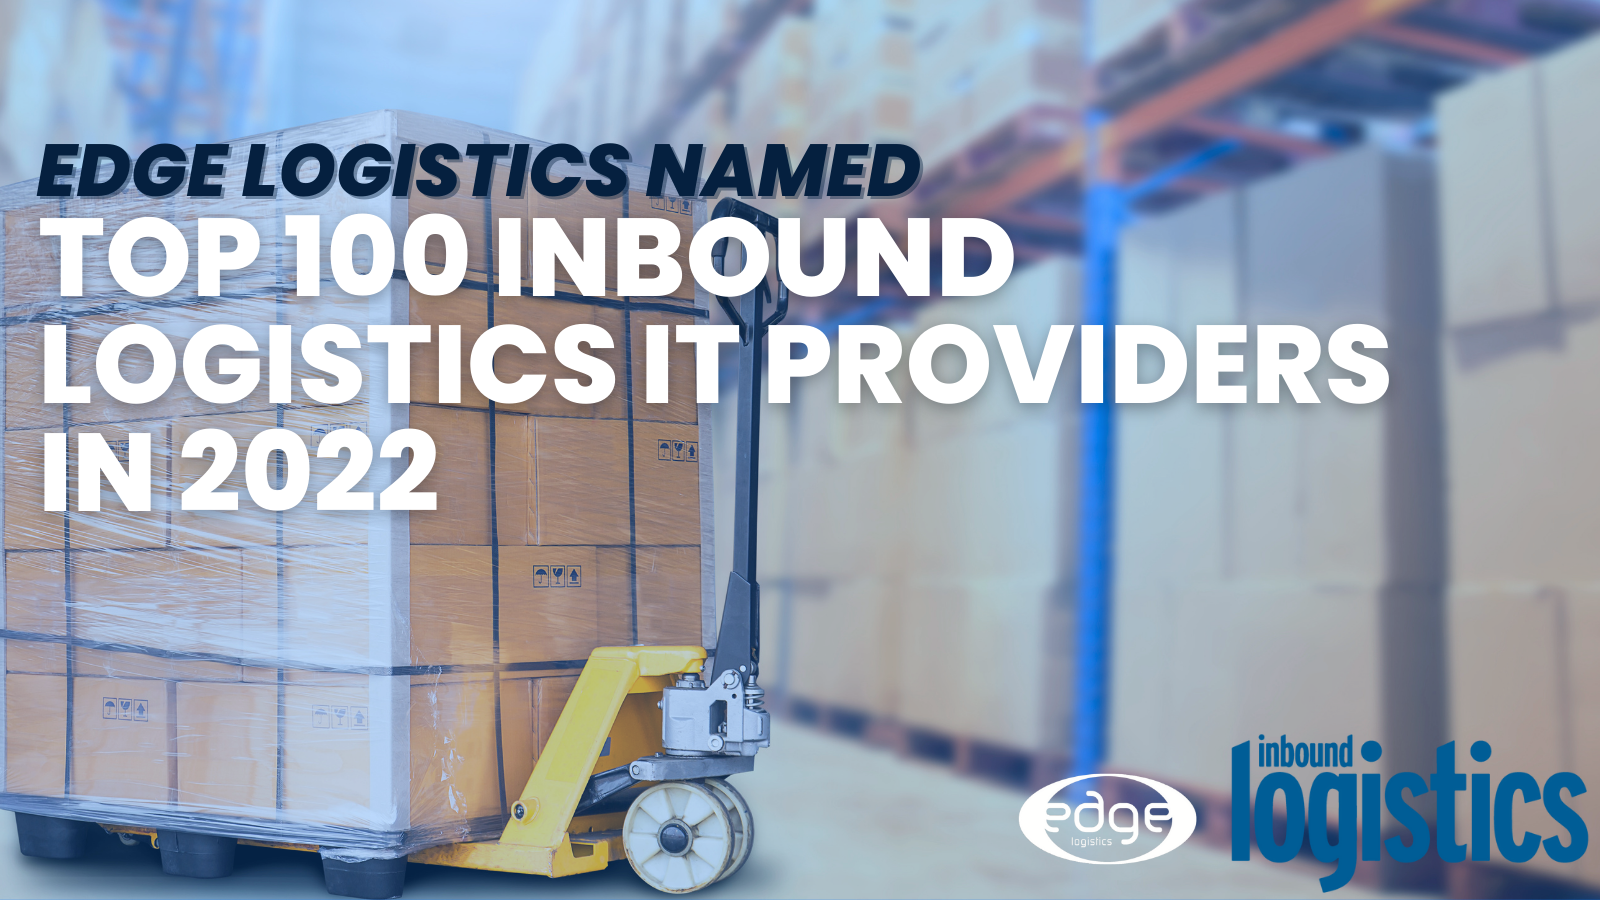 Edge Logistics’ Named on the Inbound Logistics Top IT Logistics Services Providers for 2022